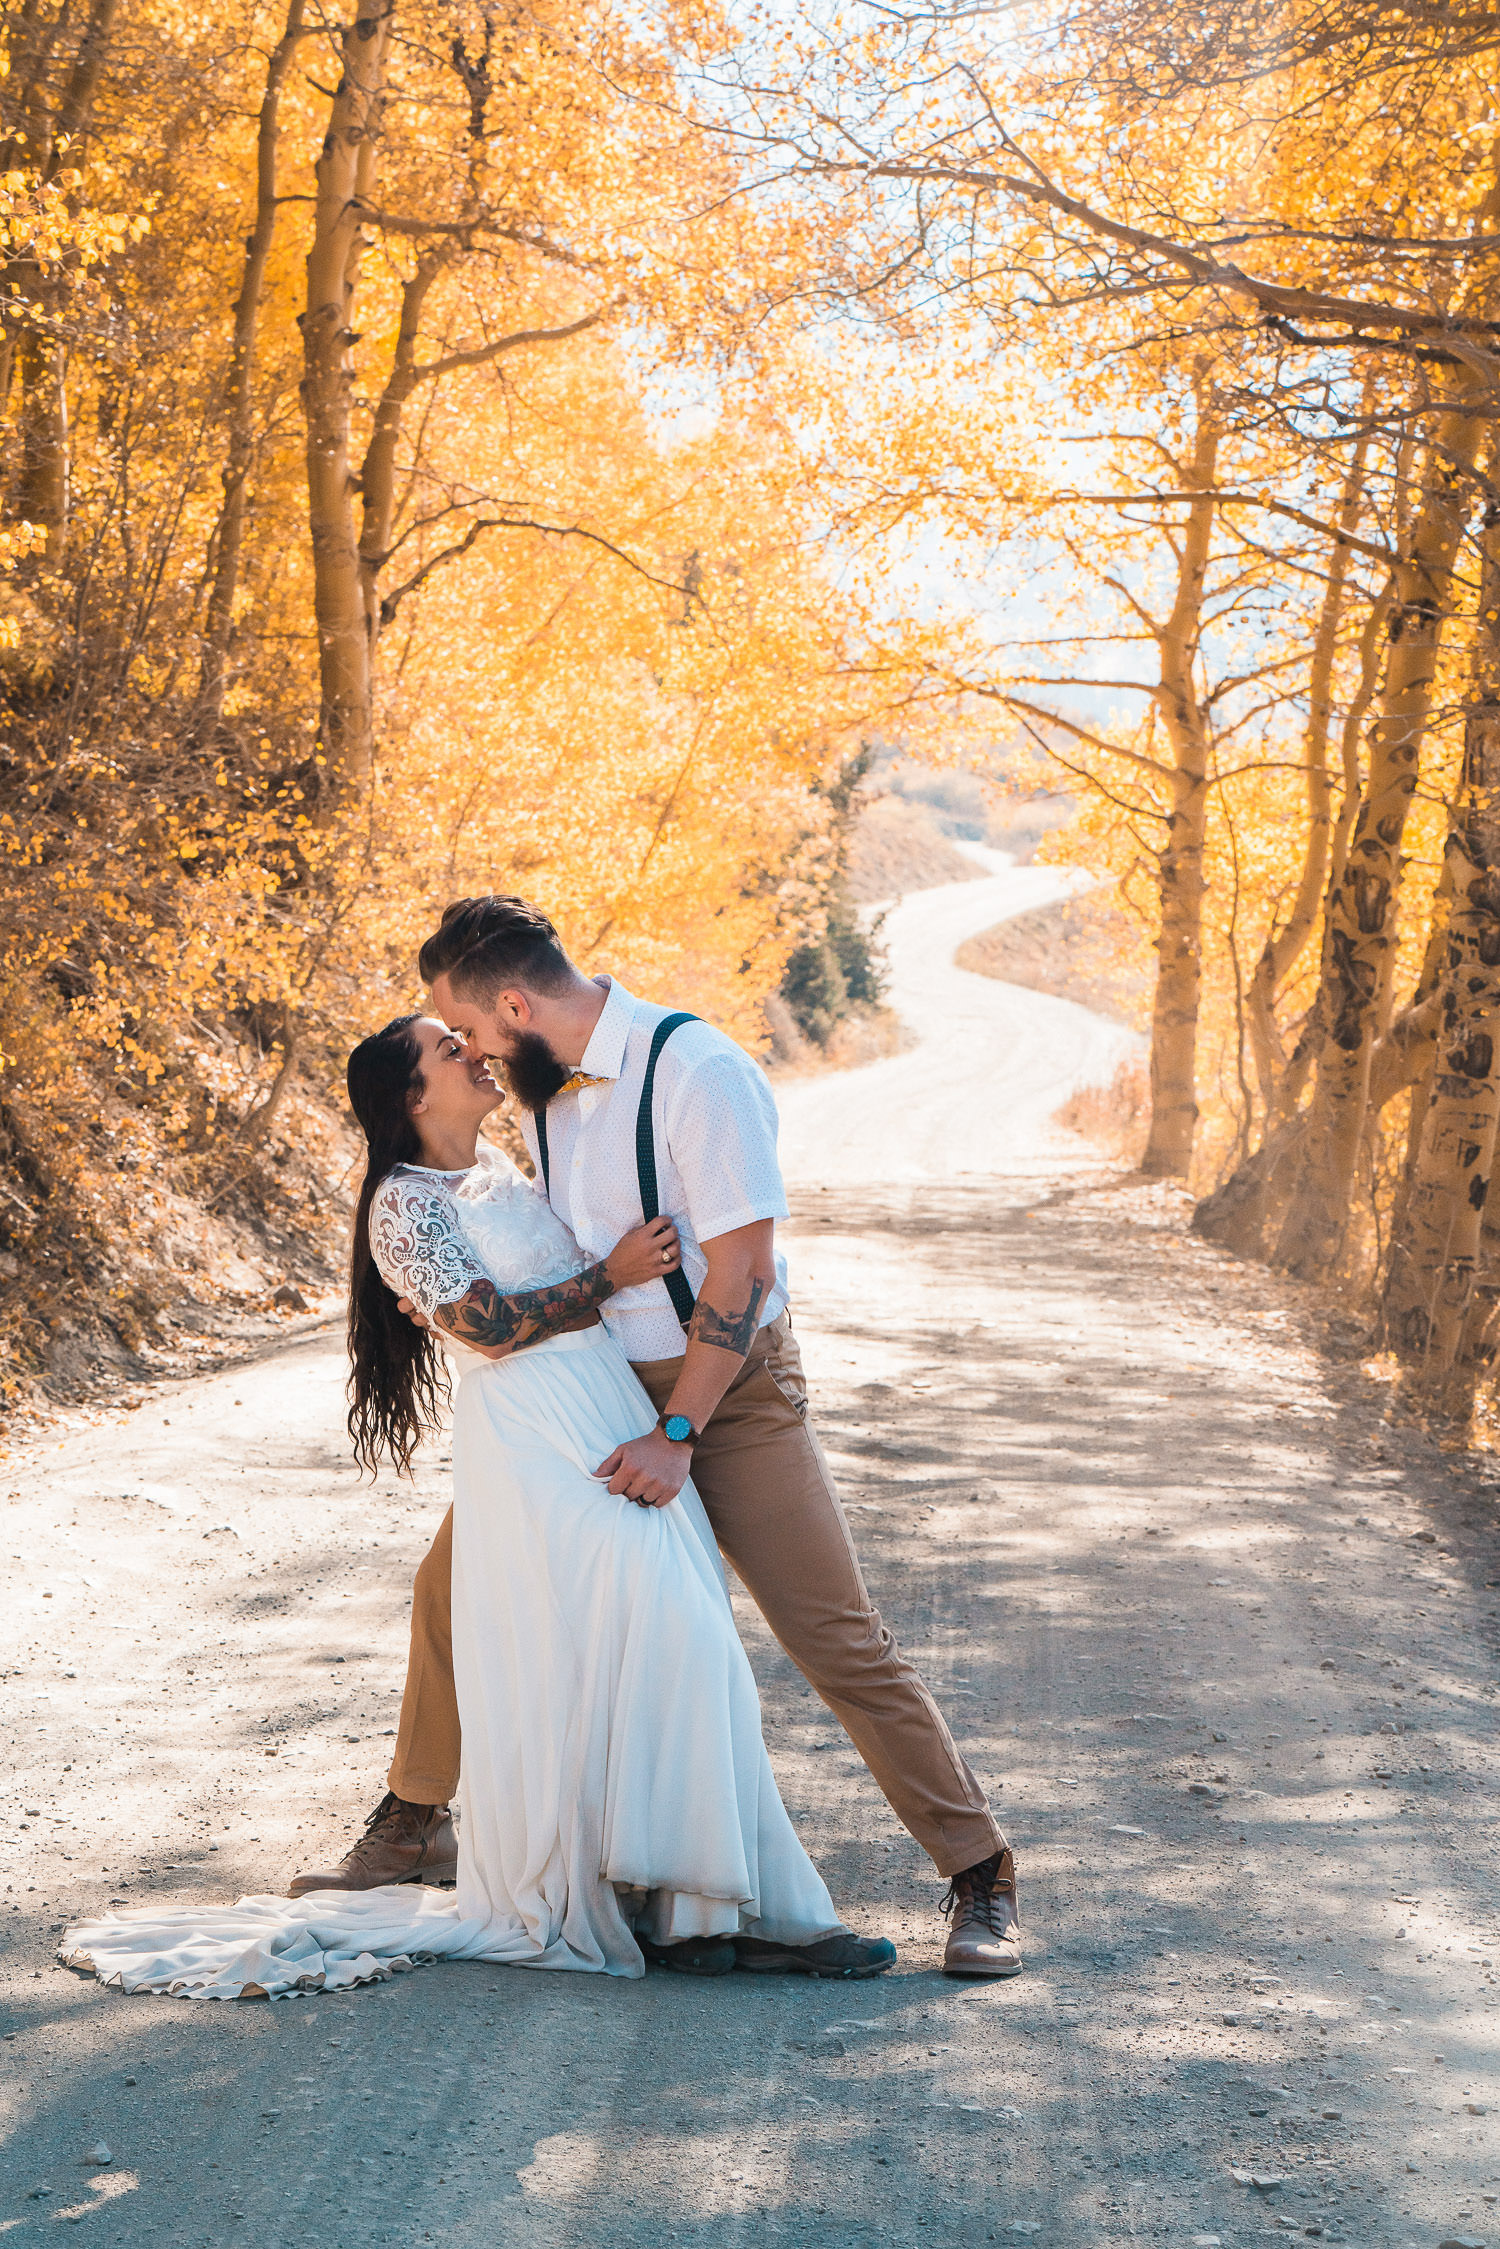 A bride and groom kiss while standing in a road surrounded by golden trees